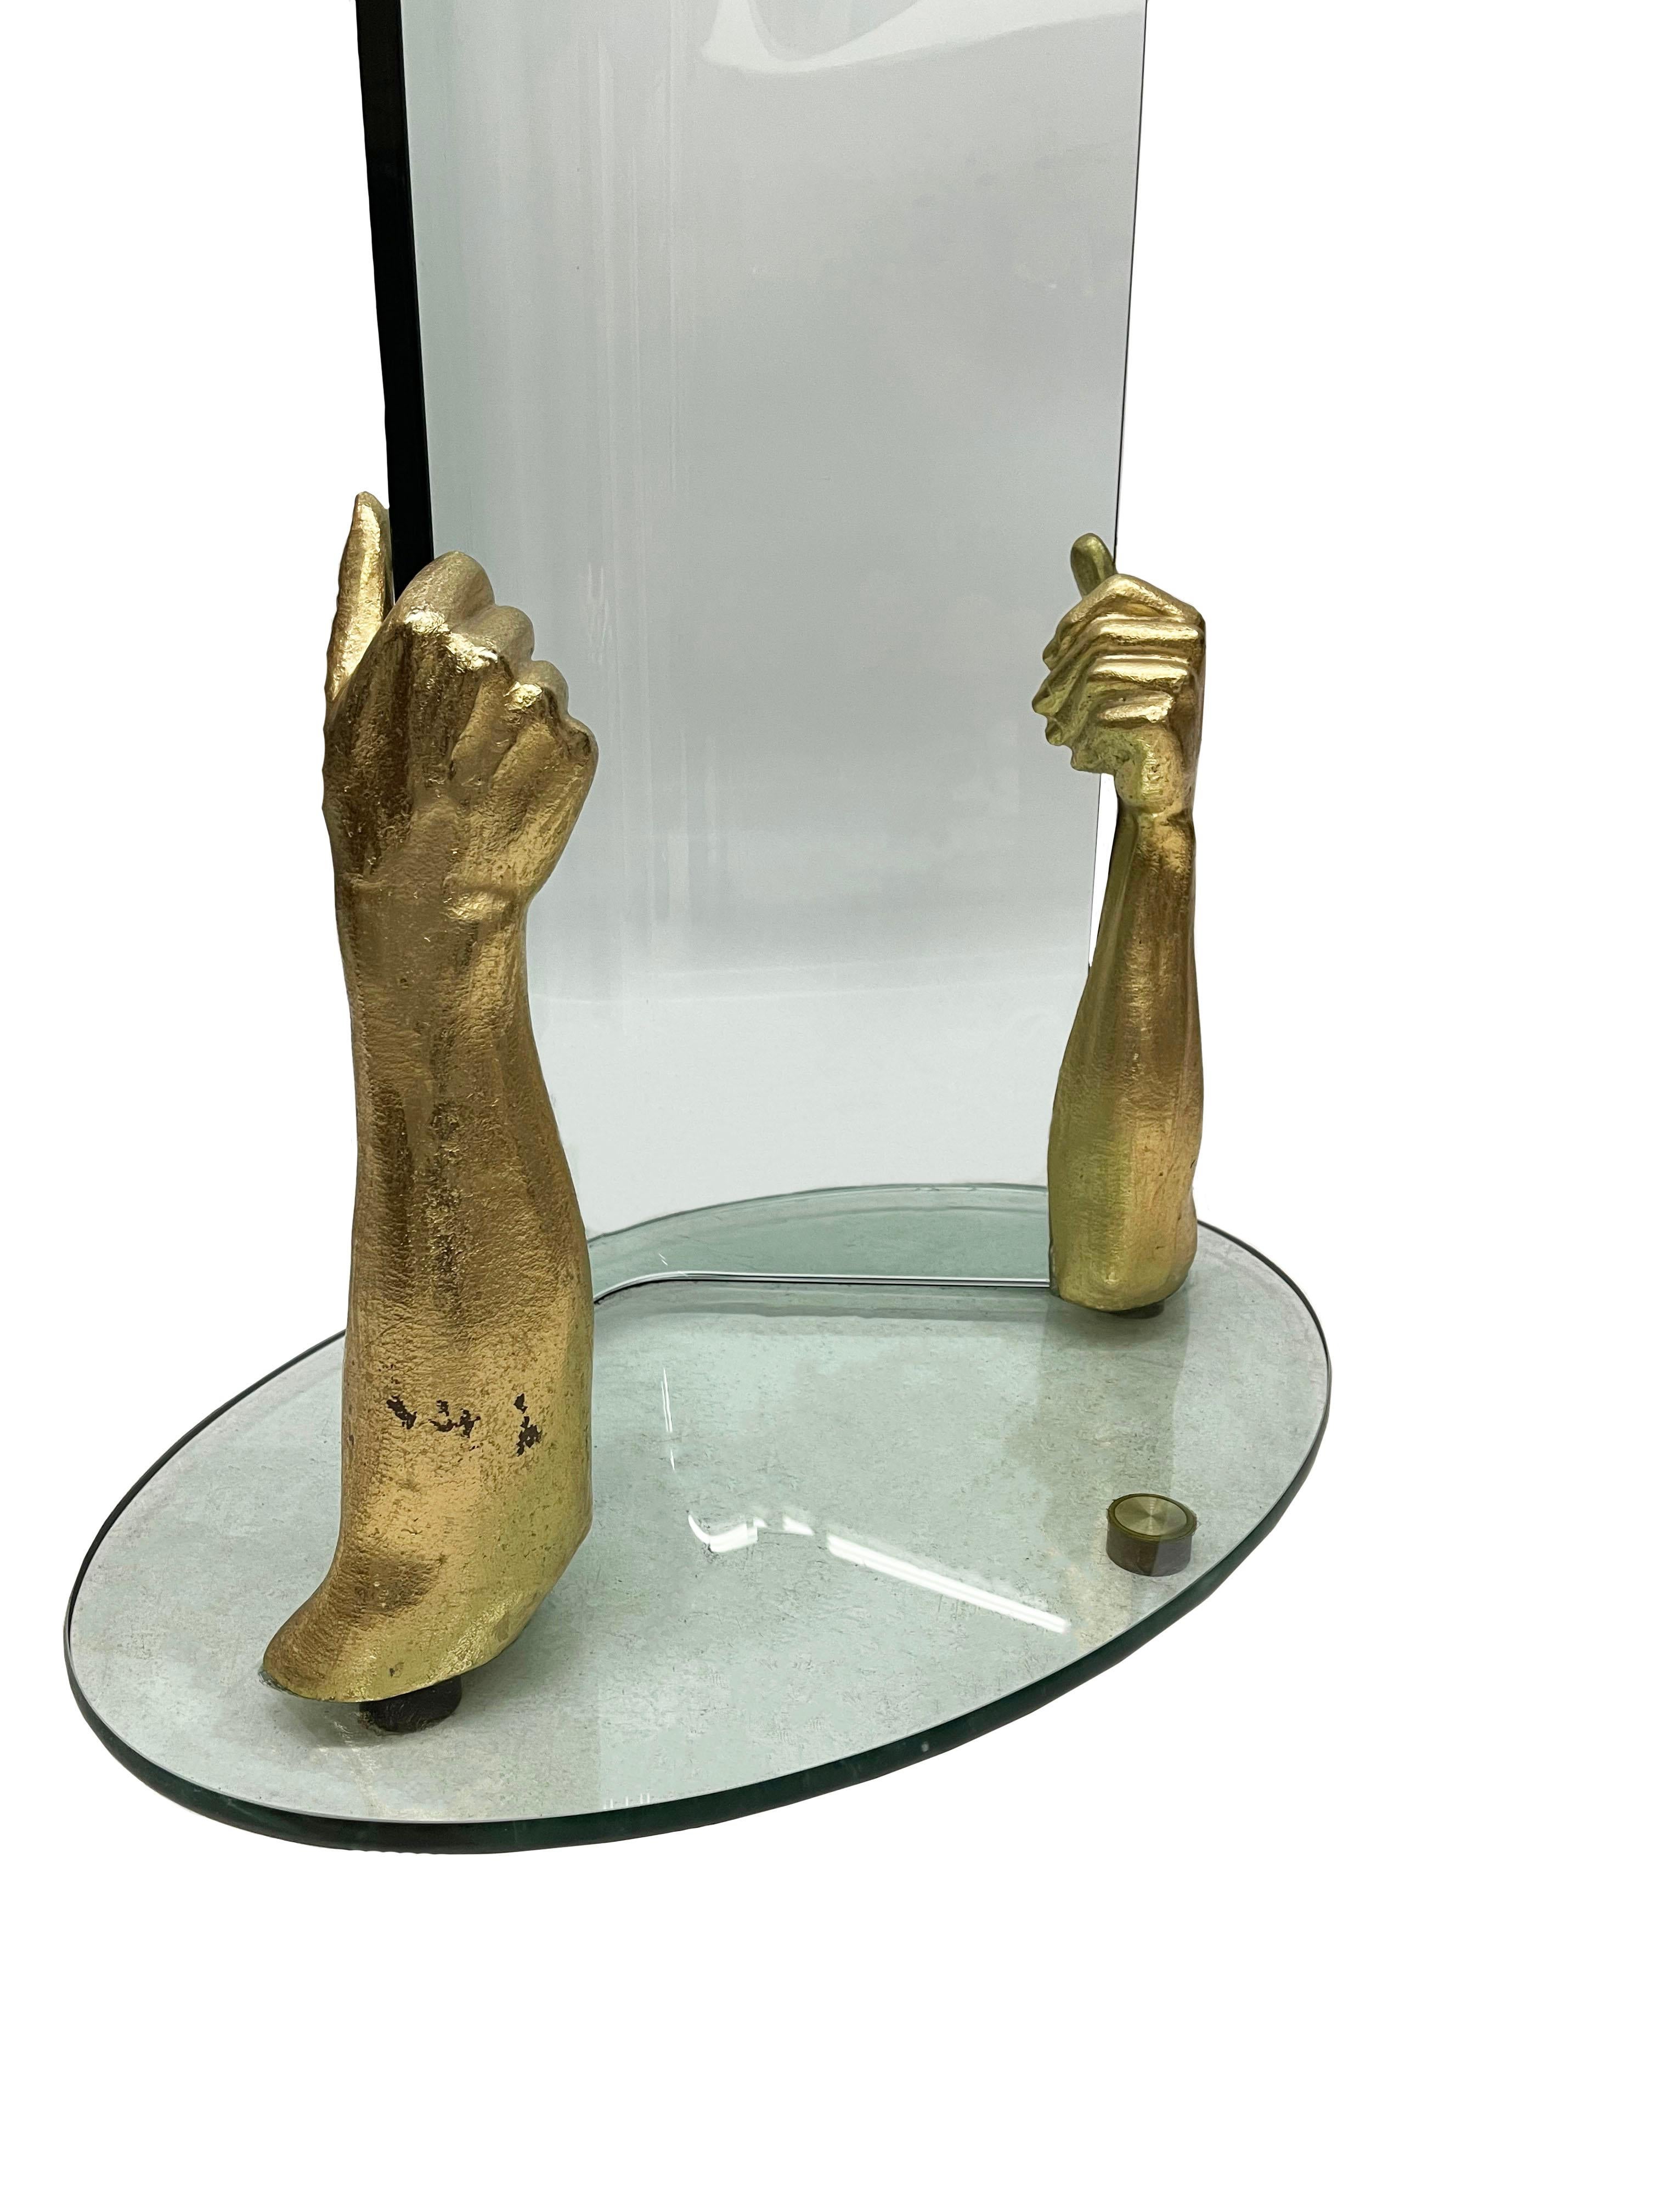 A glass with bronze standing coat rack

A modern, thick glass coat rack in the shape of a tree, with curved glass. At the bottom 2 bronze gilded arms, which the hands hold up the glass. The coat rack measures 181.5 cm high and the foot is oval and